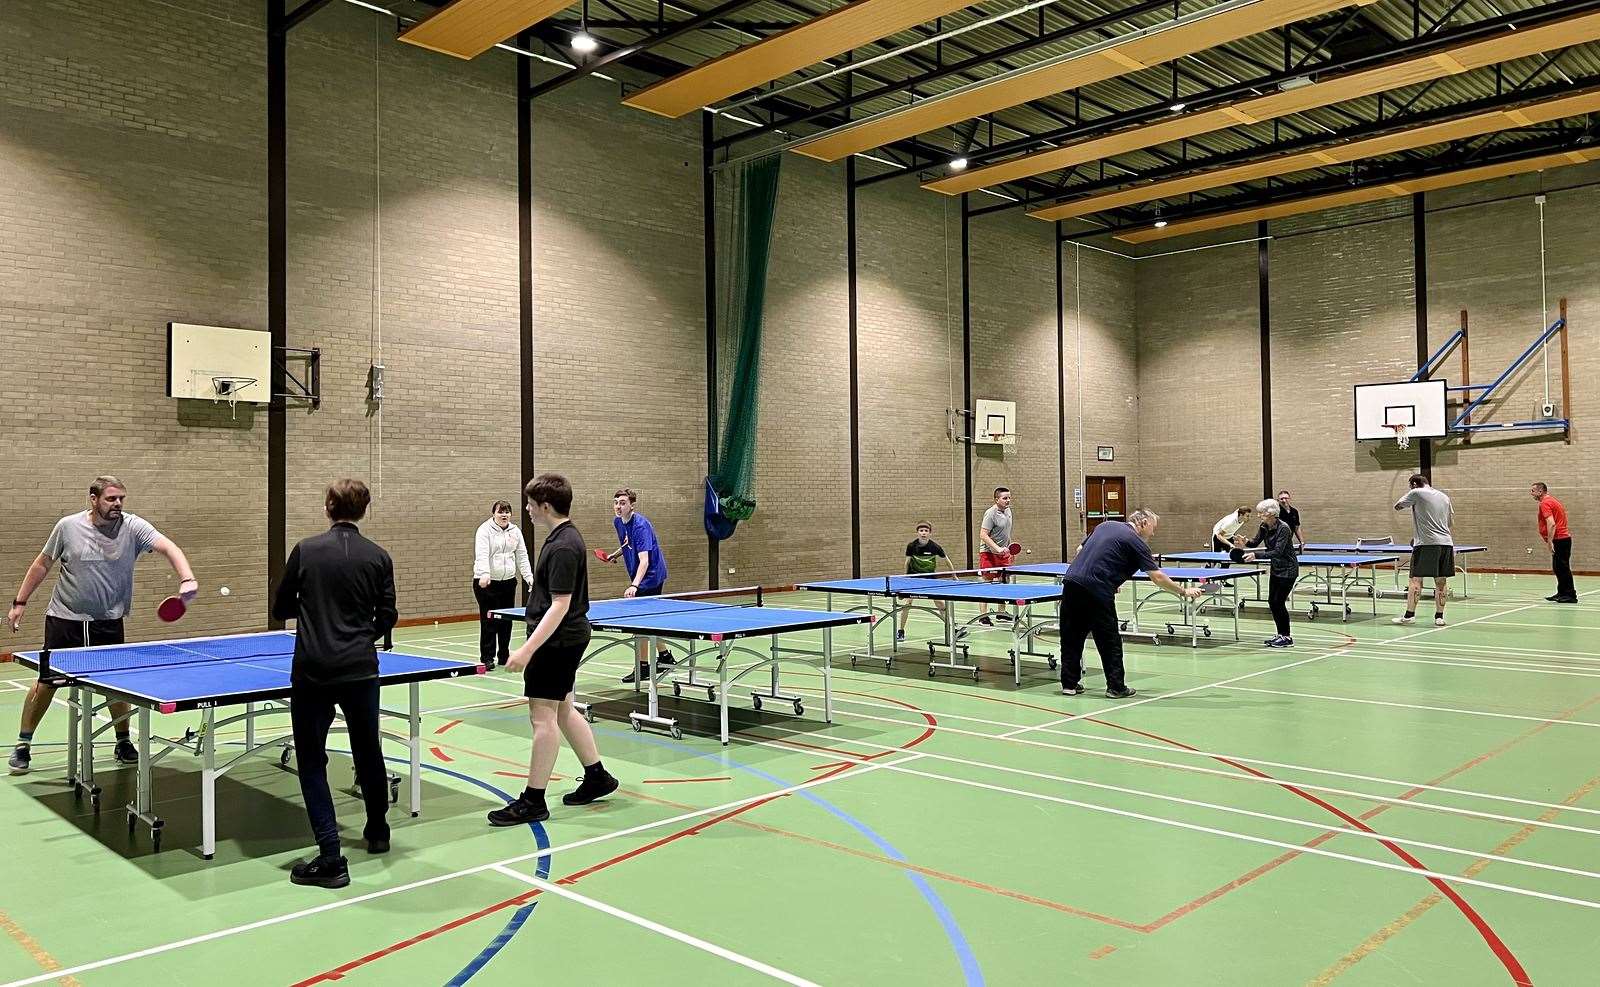 Sessions are becoming more popular at Moray Table Tennis Club.